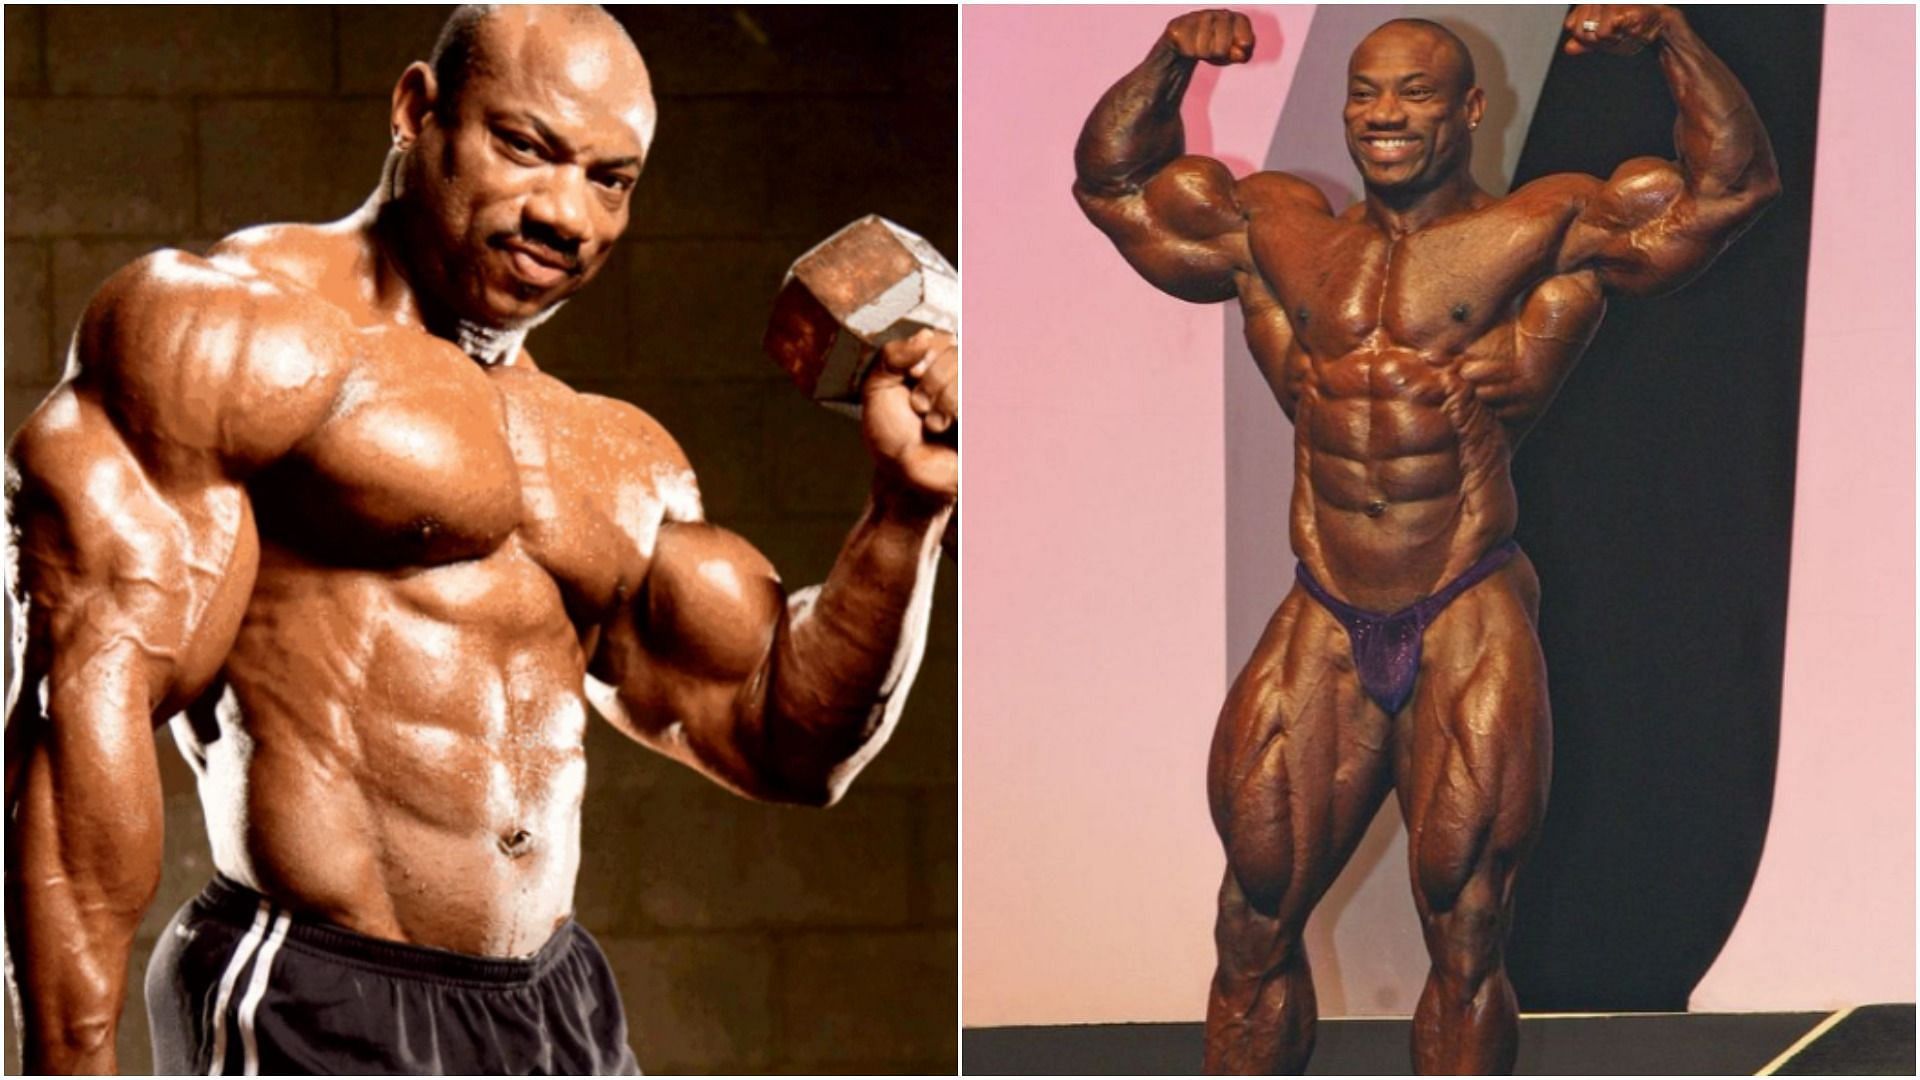 Dexter Jackson also known as &#039;The Blade&#039; is famous in the bodybuilding world. (Image via IG @mrolympia08)